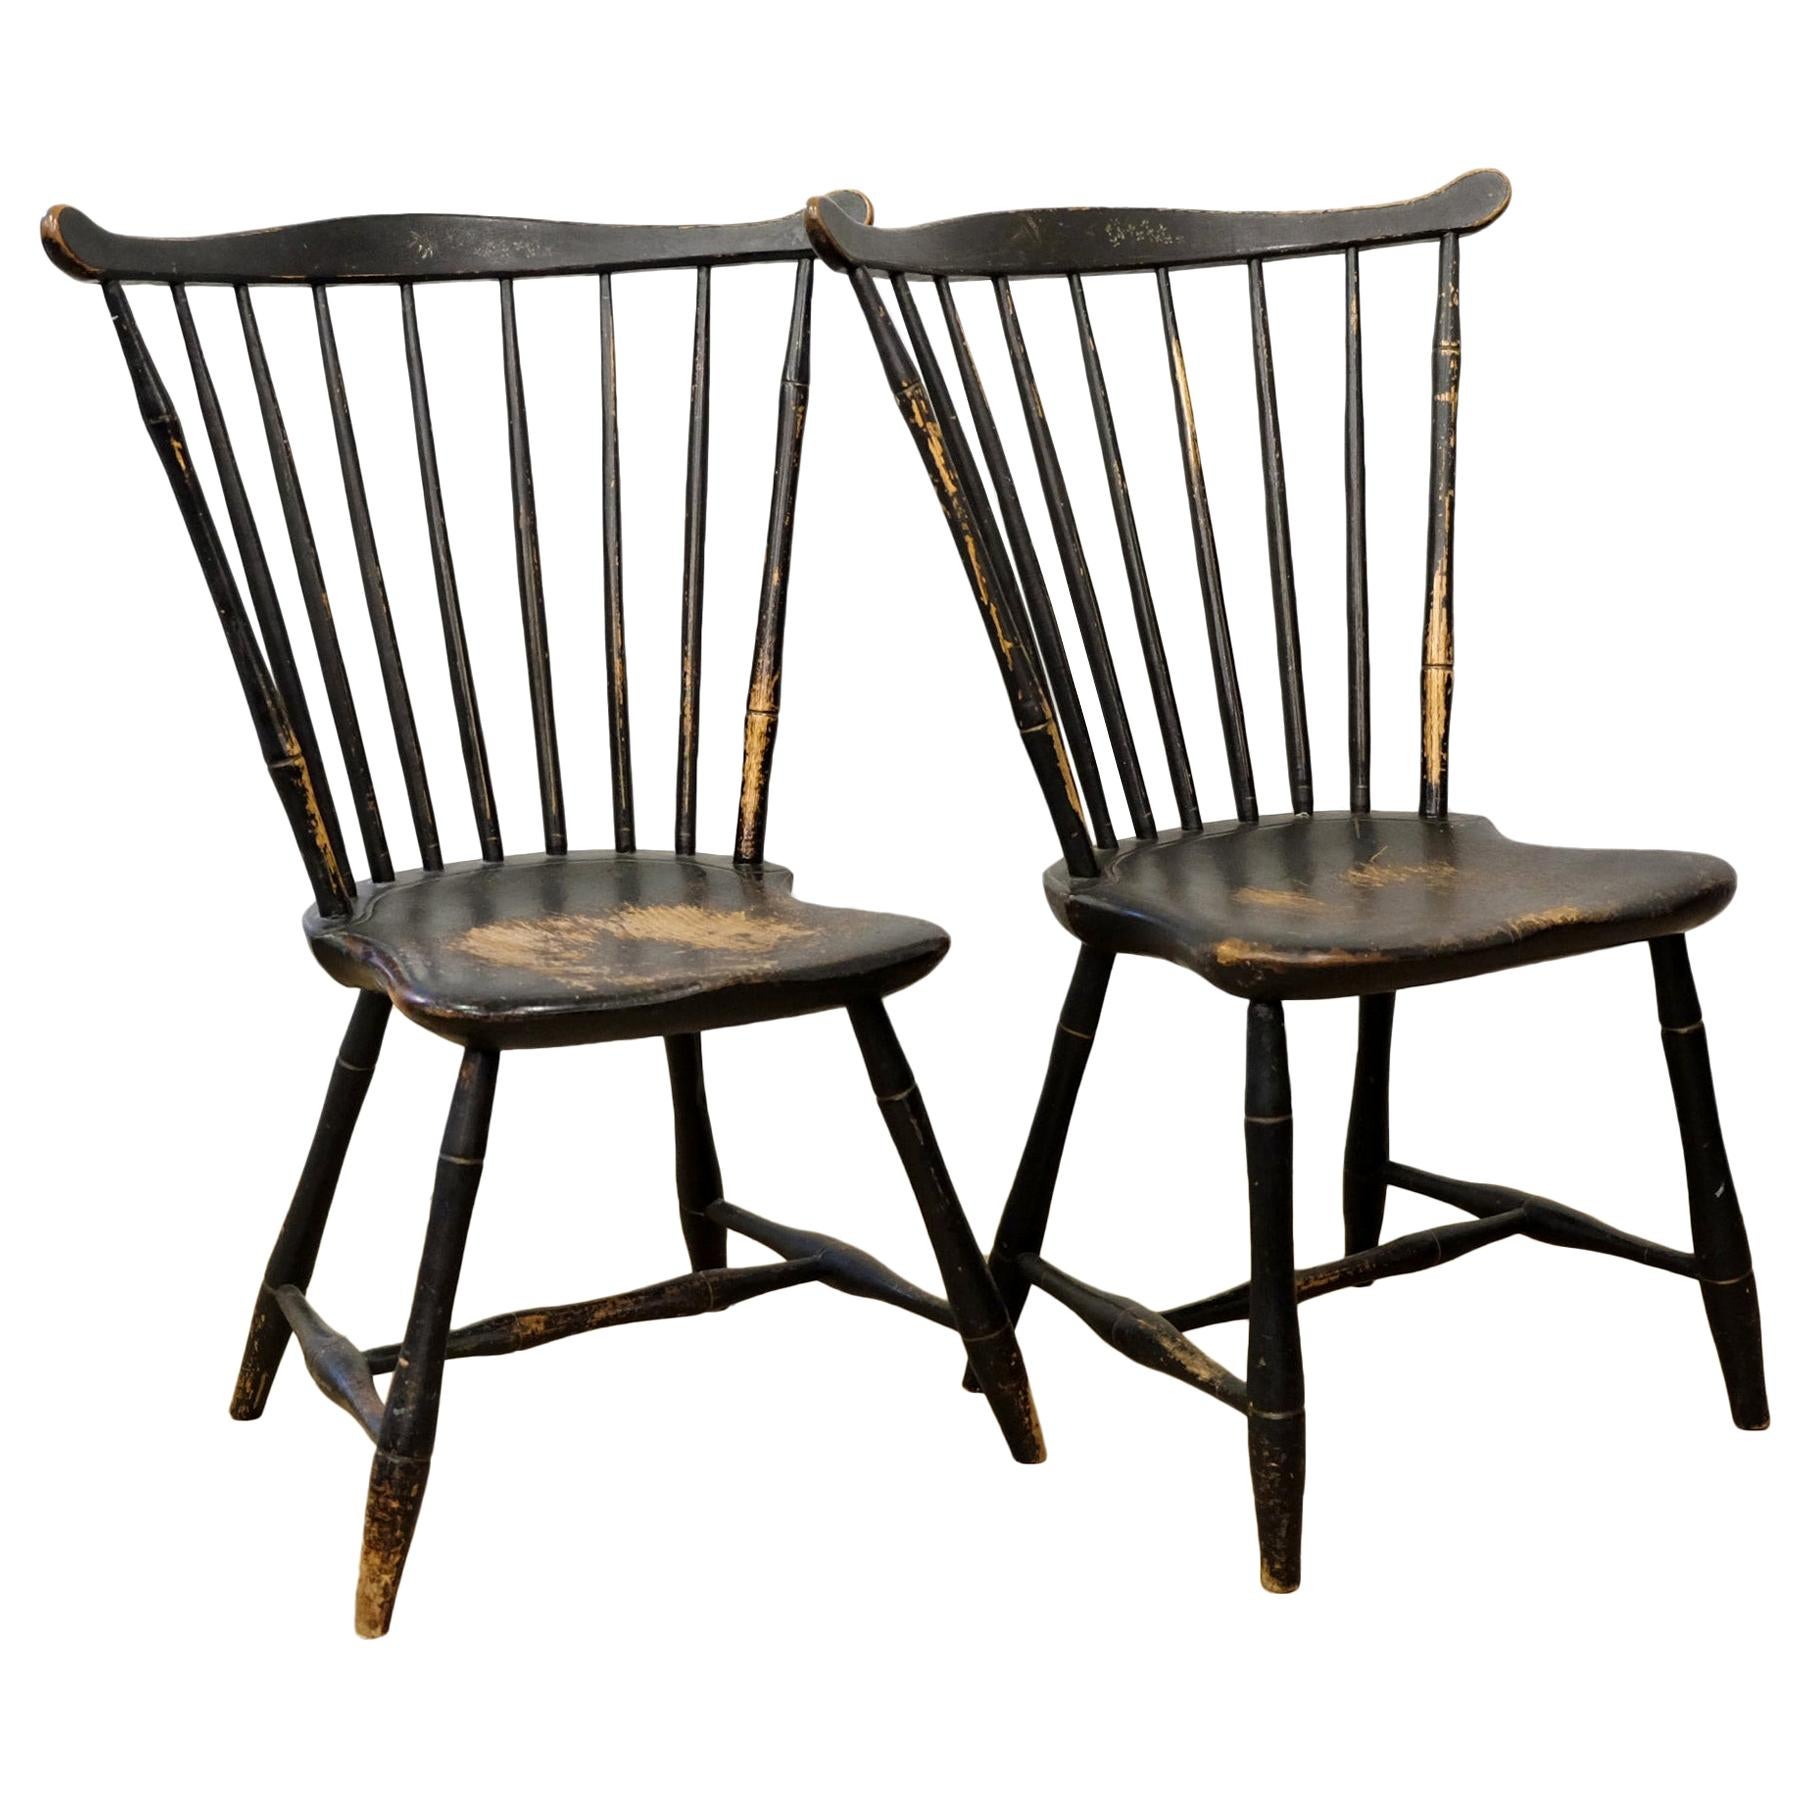 18th Century American Comb Back Windsor Side Chairs, New England, Original Paint